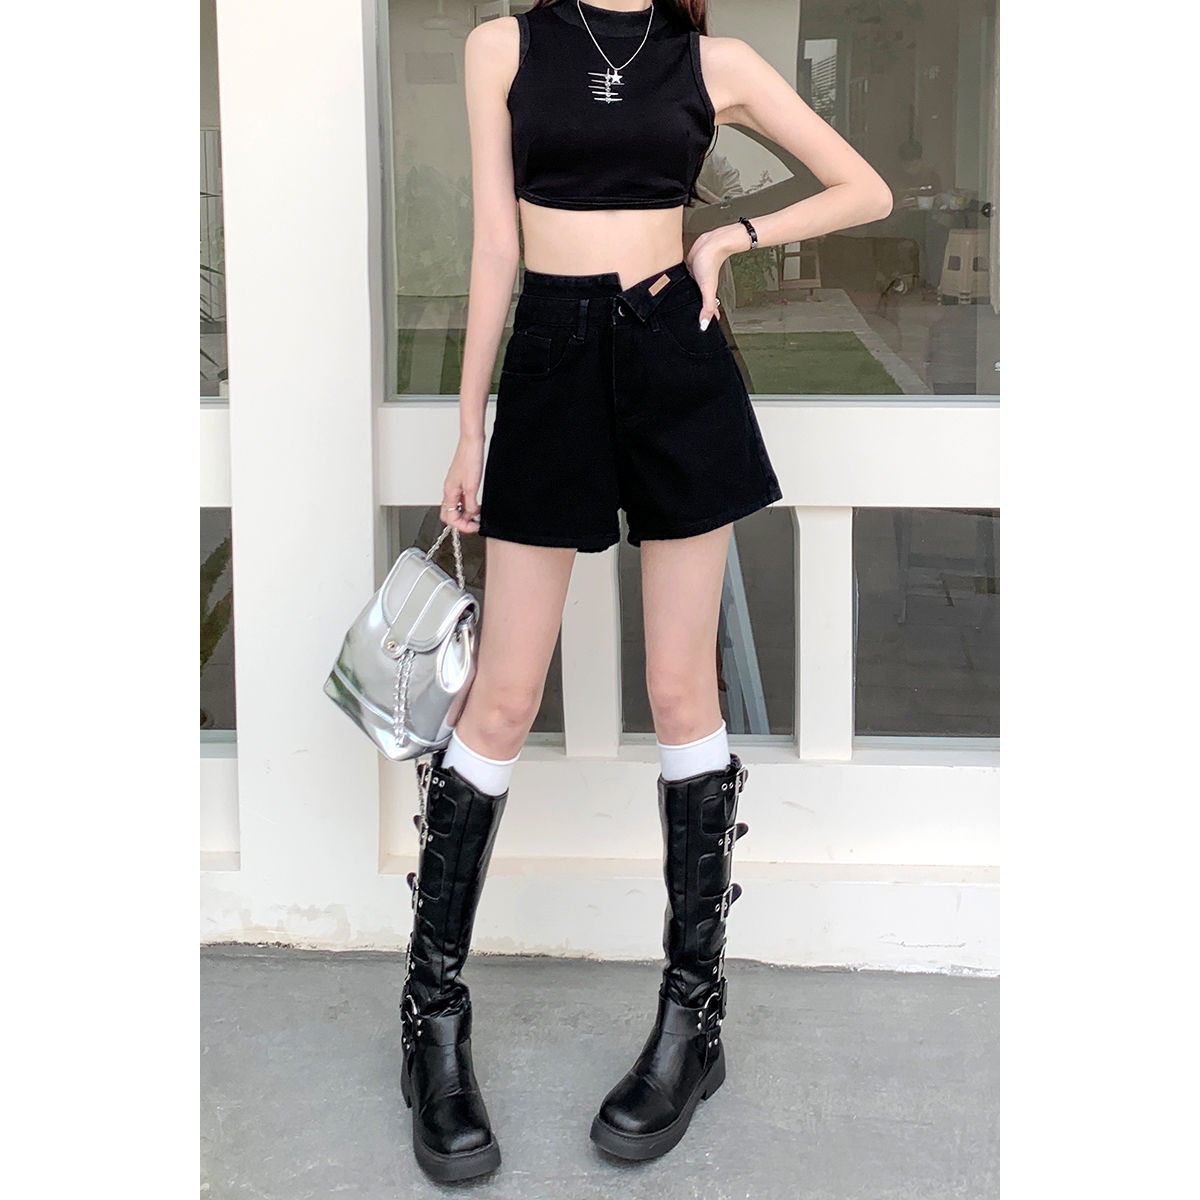 [PROMONE] High-waisted black denim shorts for women in summer new style irregular a-line loose slimming pants for women